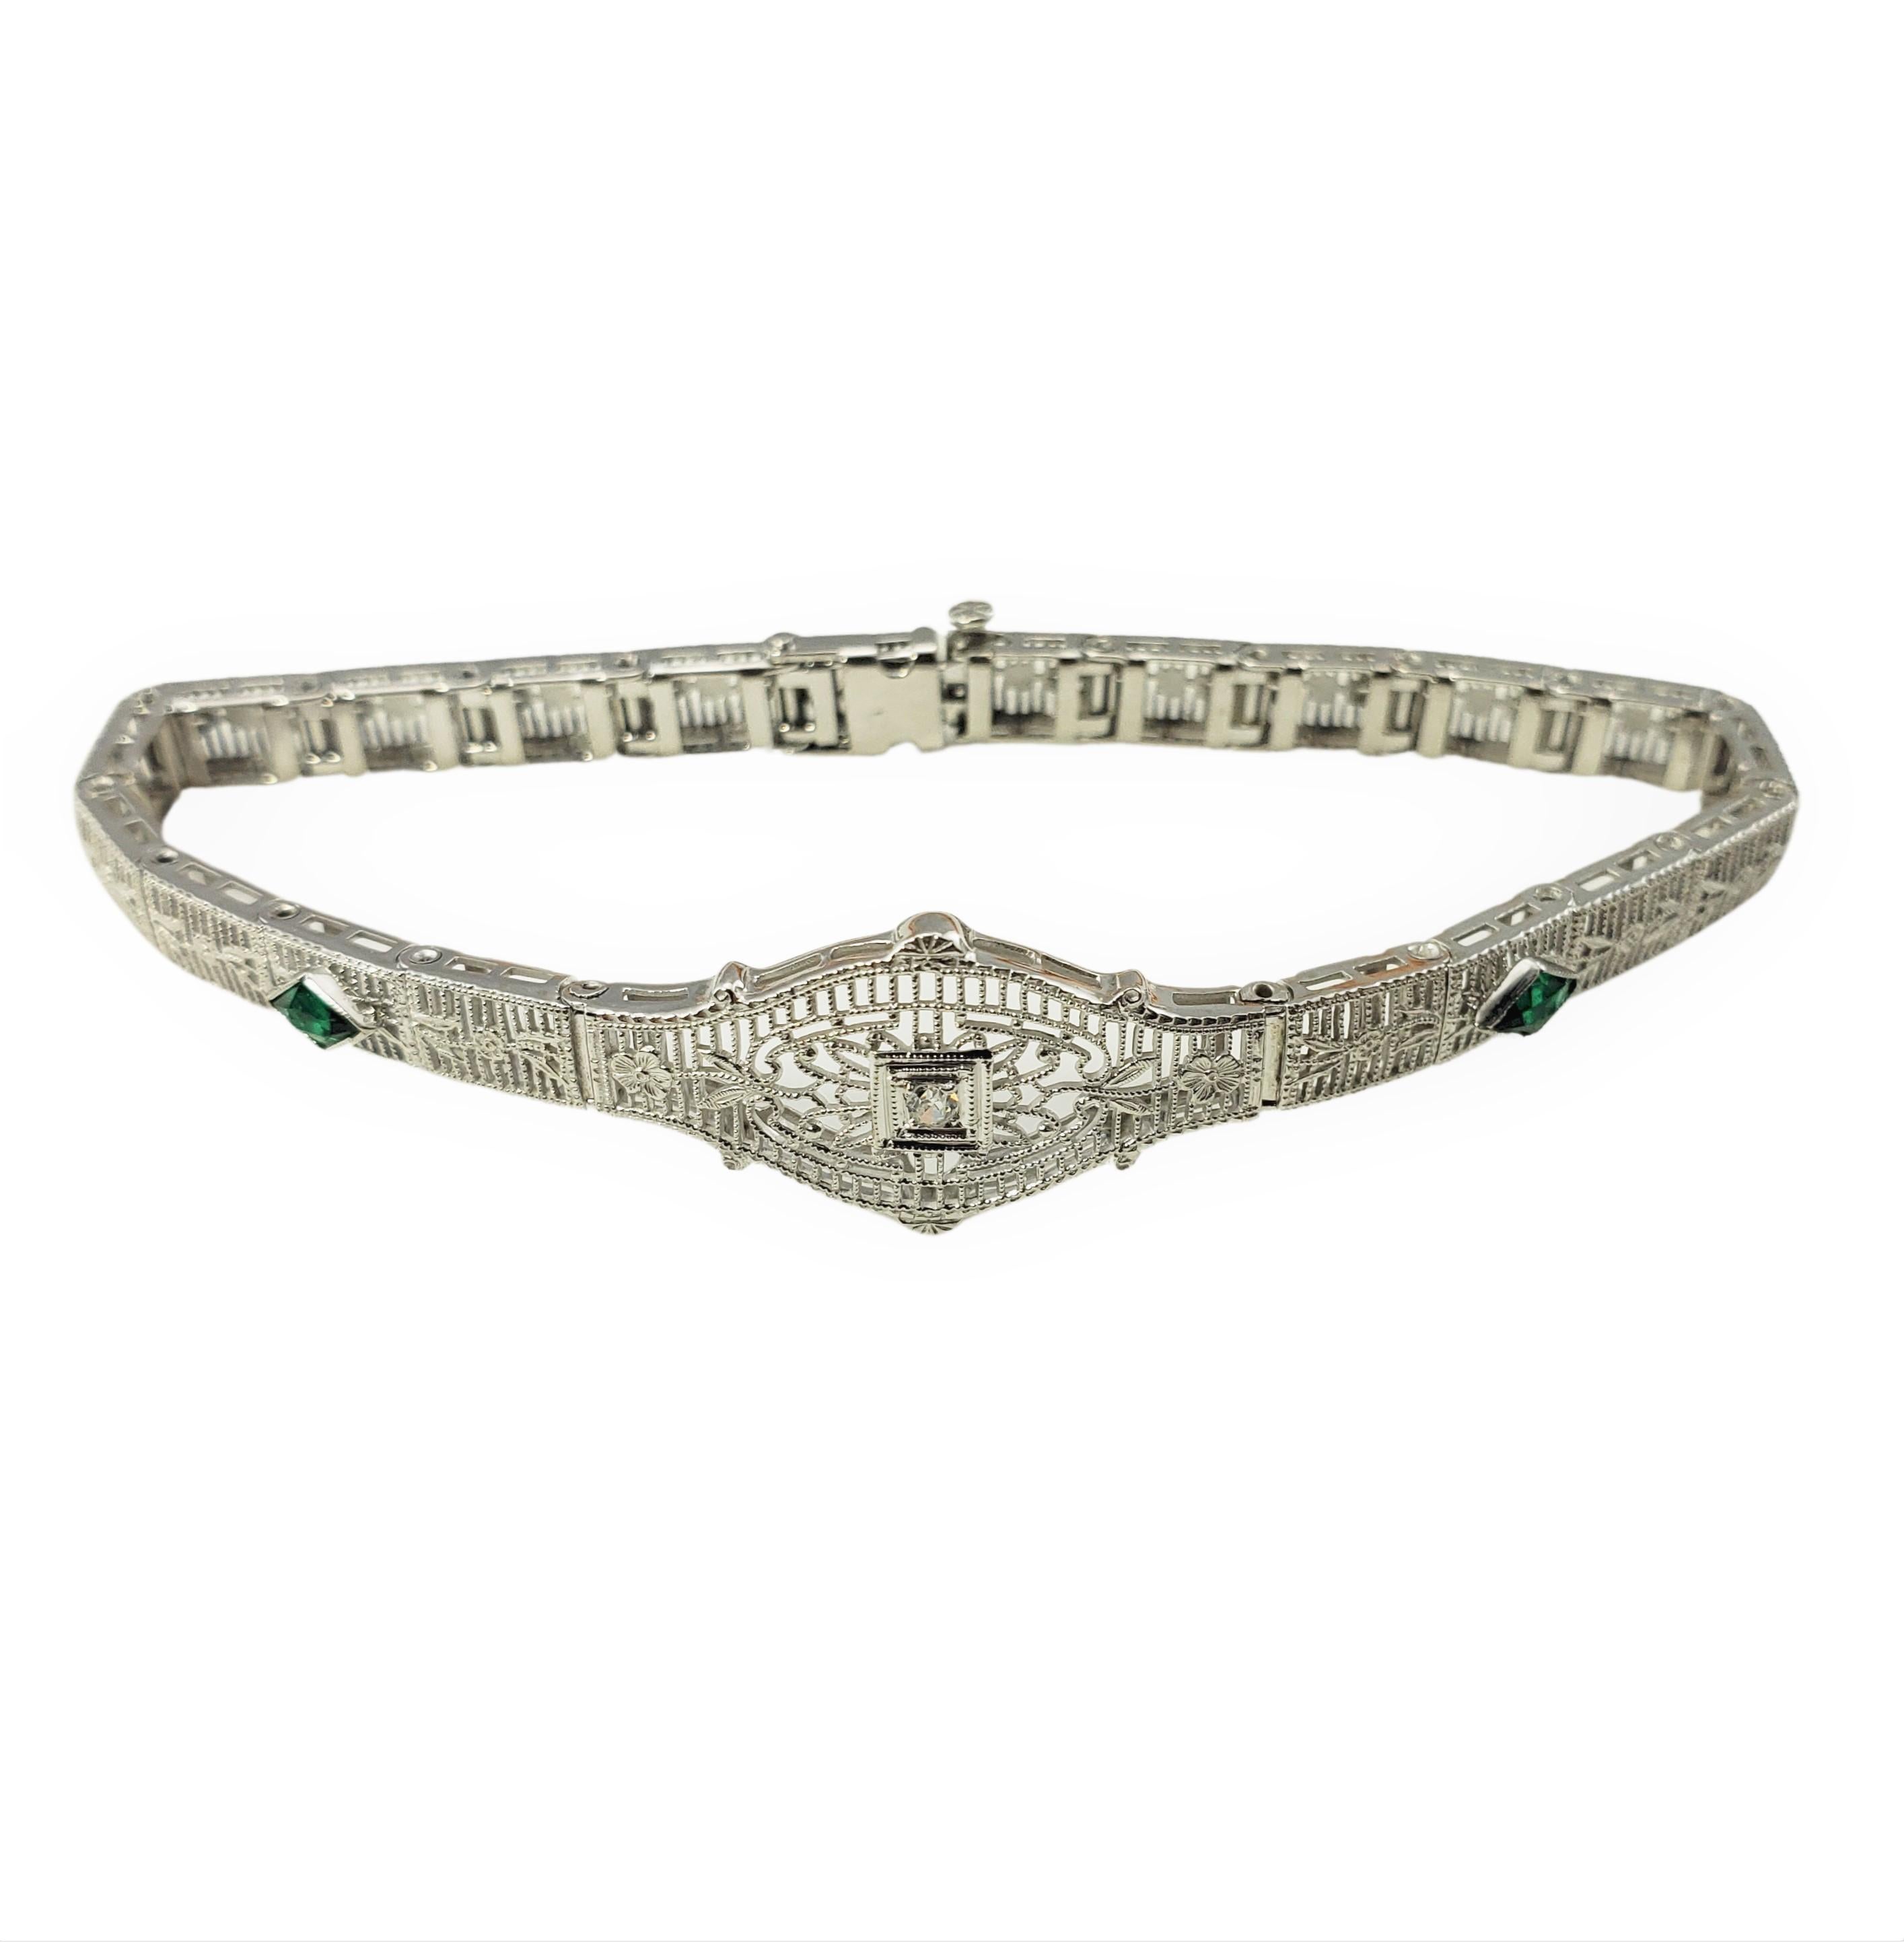 Vintage 10 Karat White Gold Filigree Diamond and Emerald Bracelet-

This lovely bracelet features one round single cut diamond approx. .02cts and two simulated emeralds set in beautifully detailed 10K white gold filigree.  Width:  13 mm.

Diamond